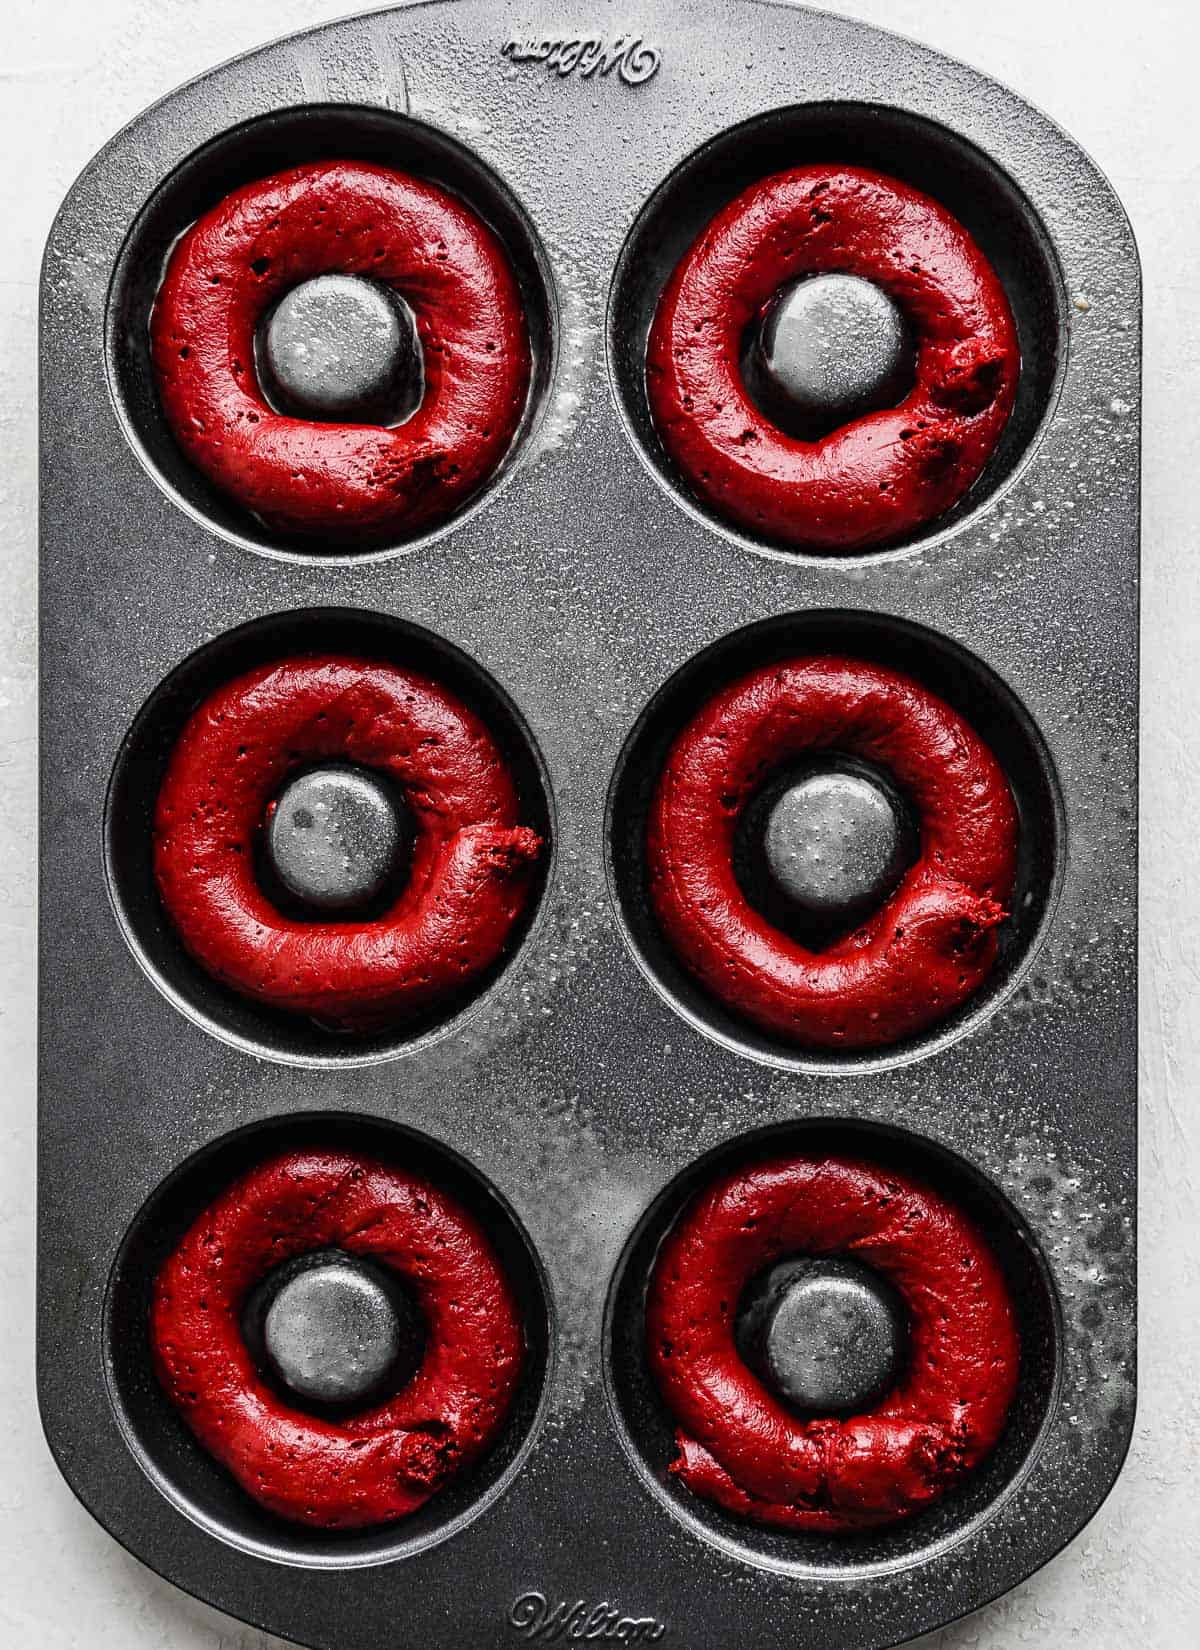 A donut pan with red velvet donut batter in the donut cavities.